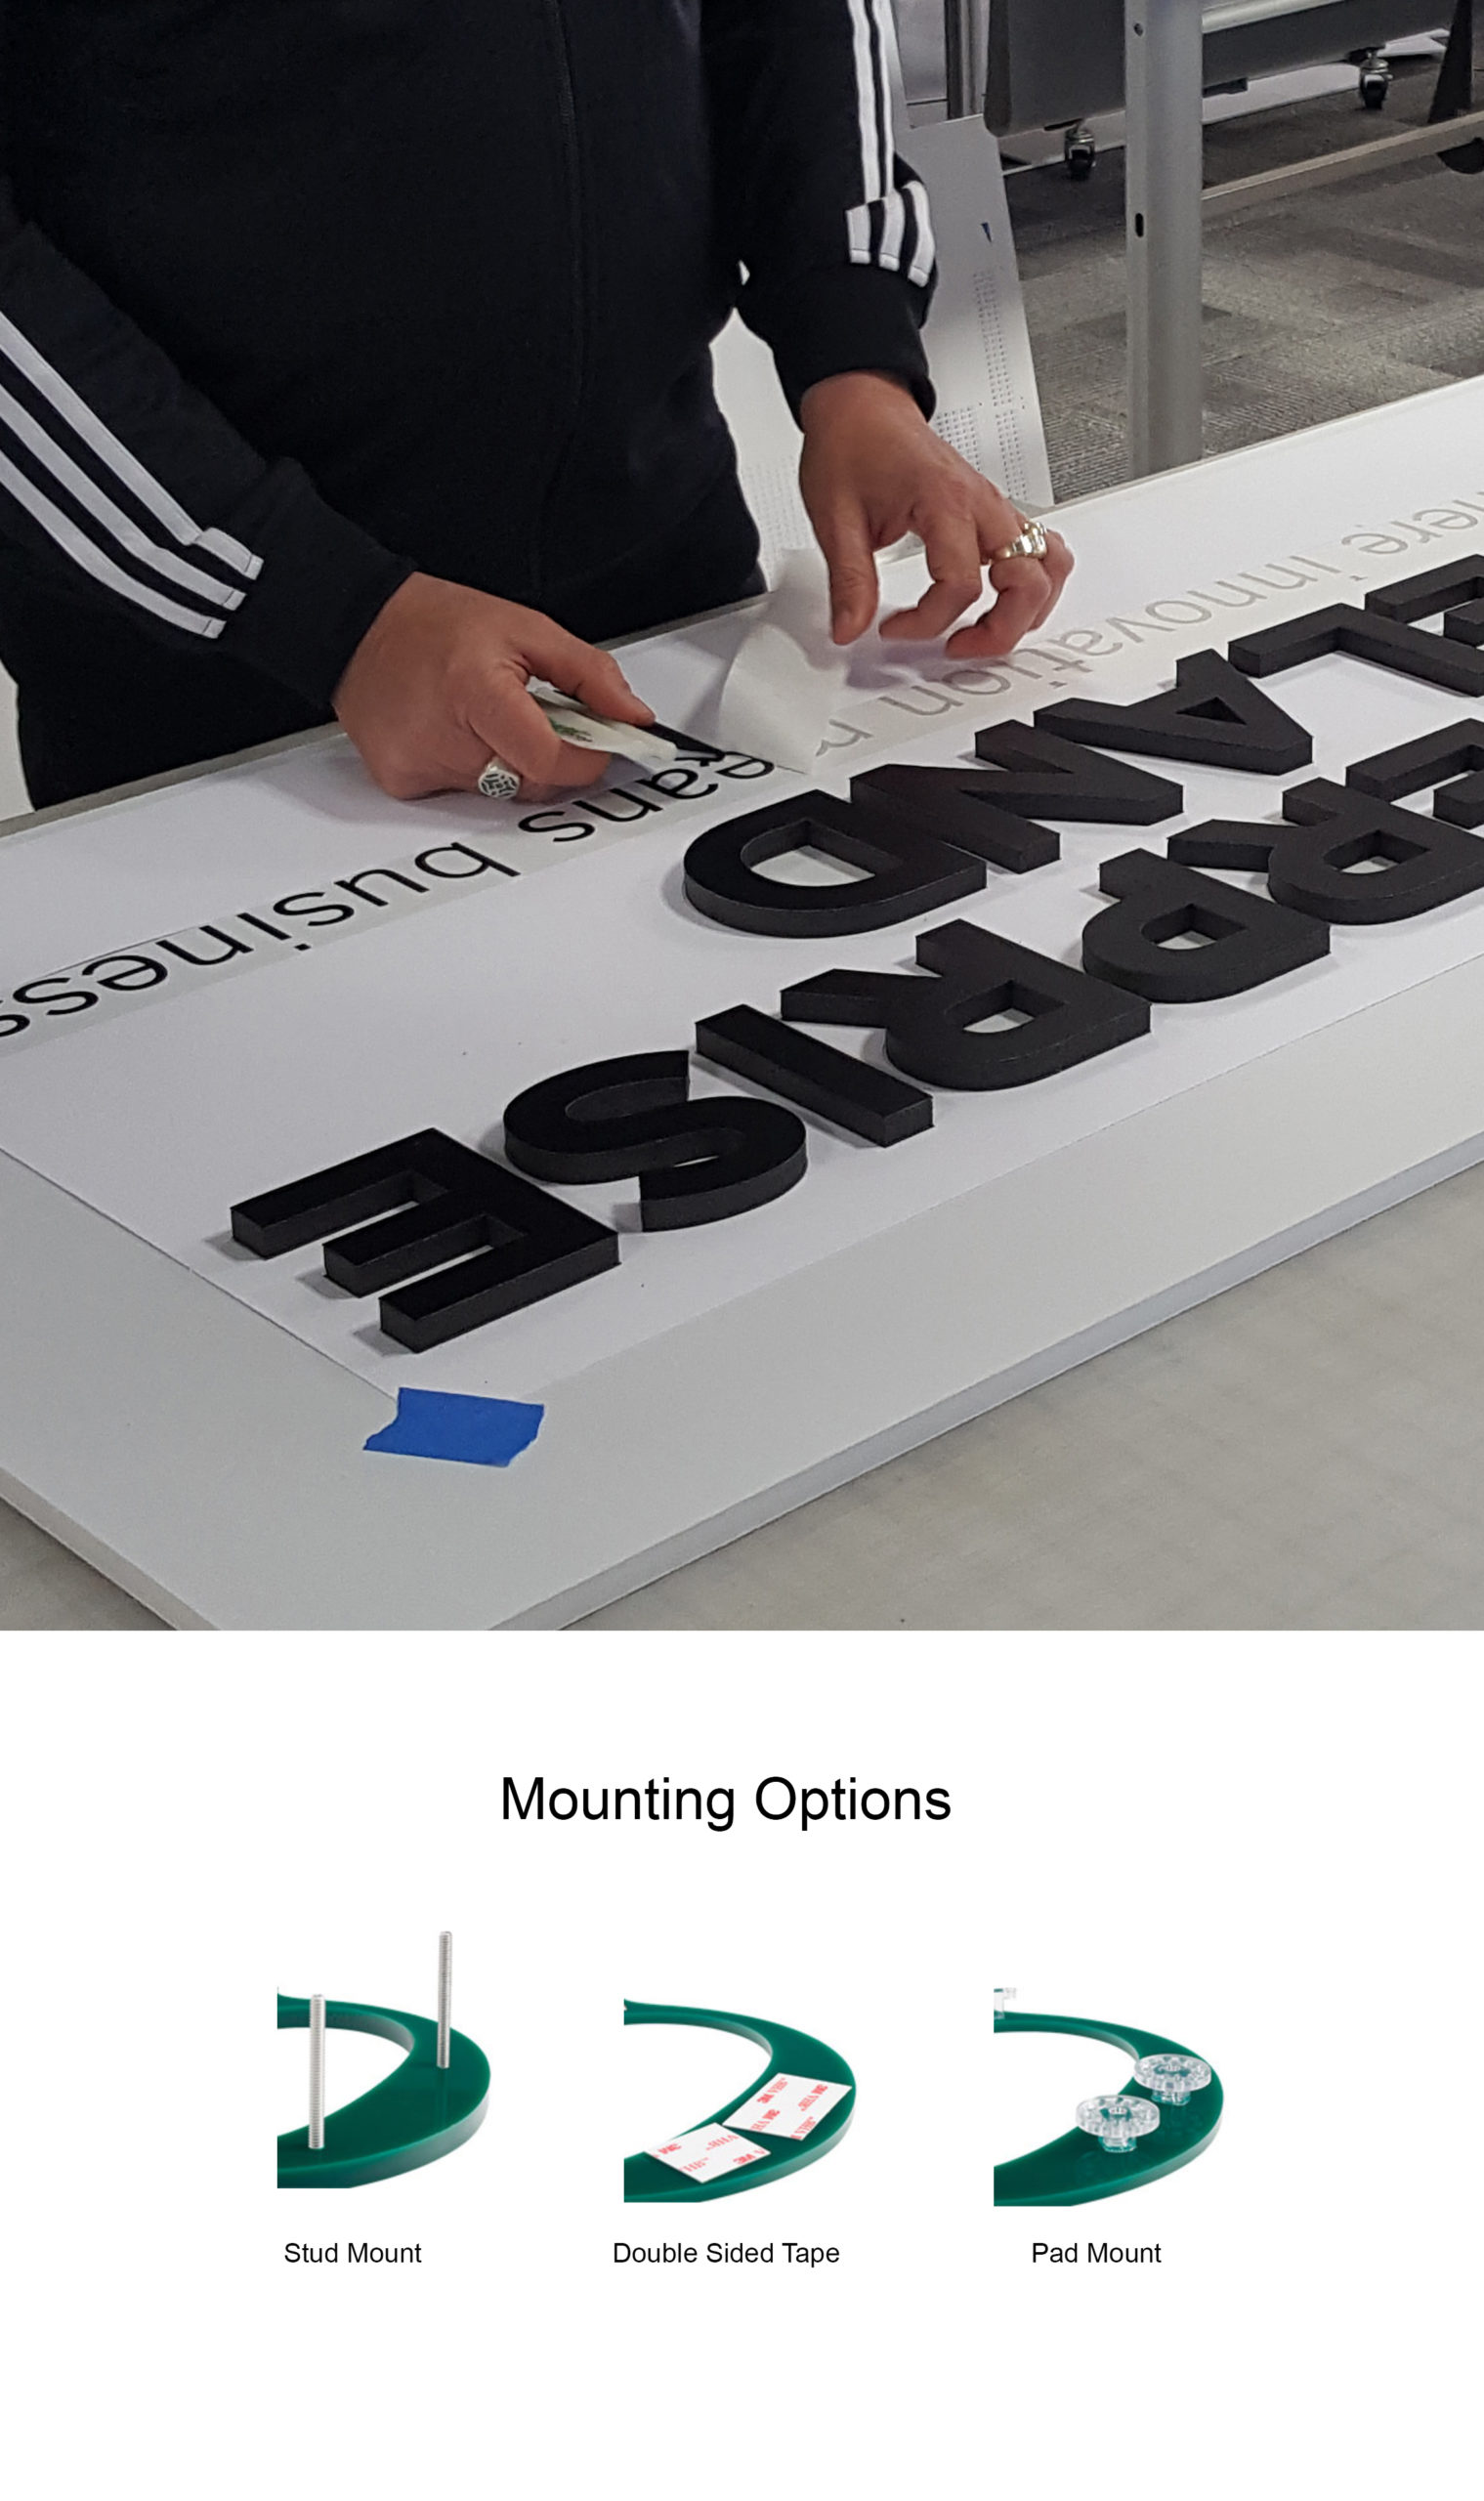 Mounting options for signs: stud mount, double sided tape, or pad mount